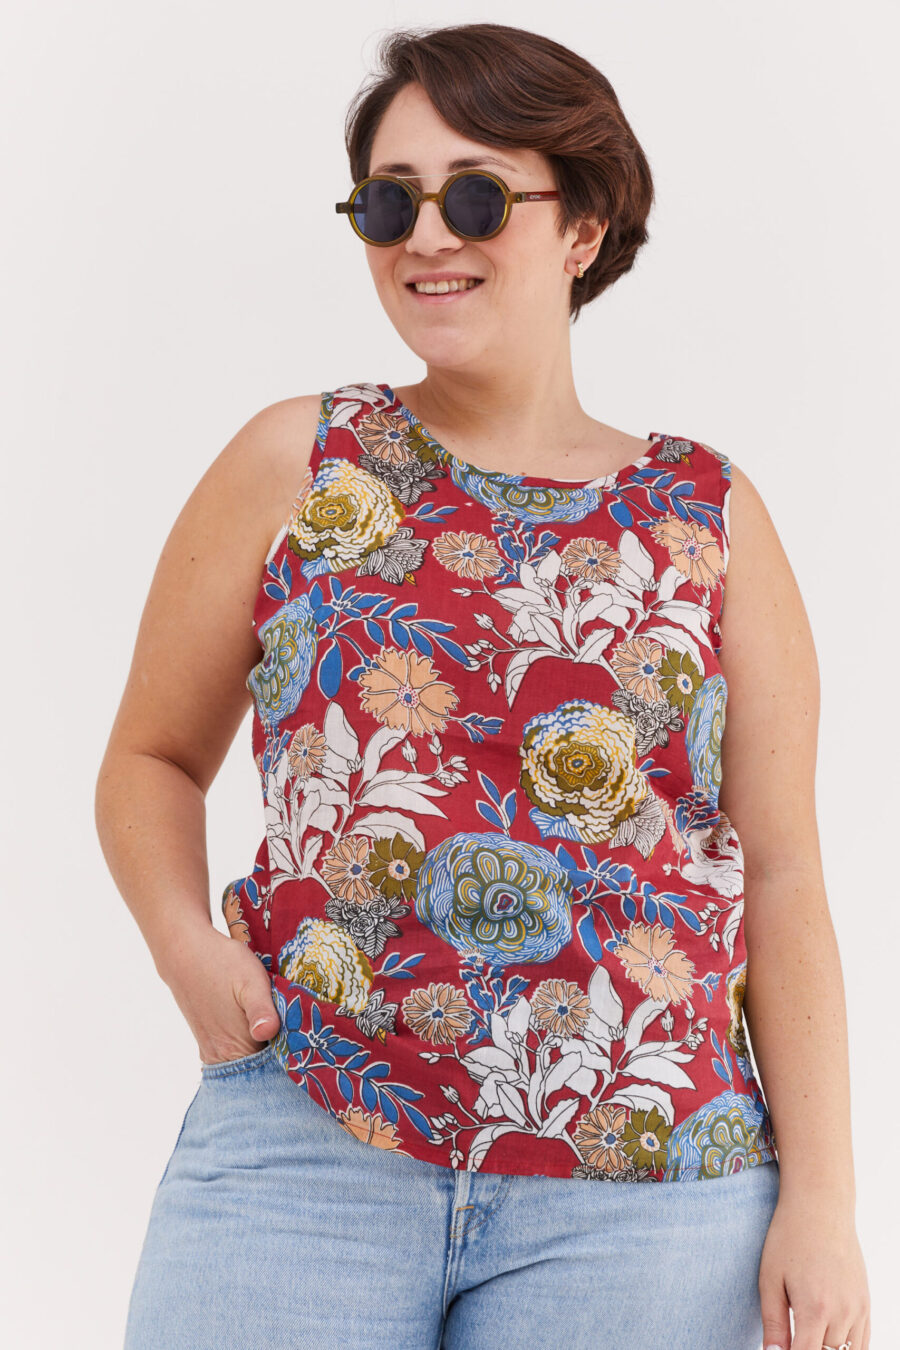 Flattering and comfortable tanktop – Red blossom, colorful floral print on a red tanktop by comfort zone boutique